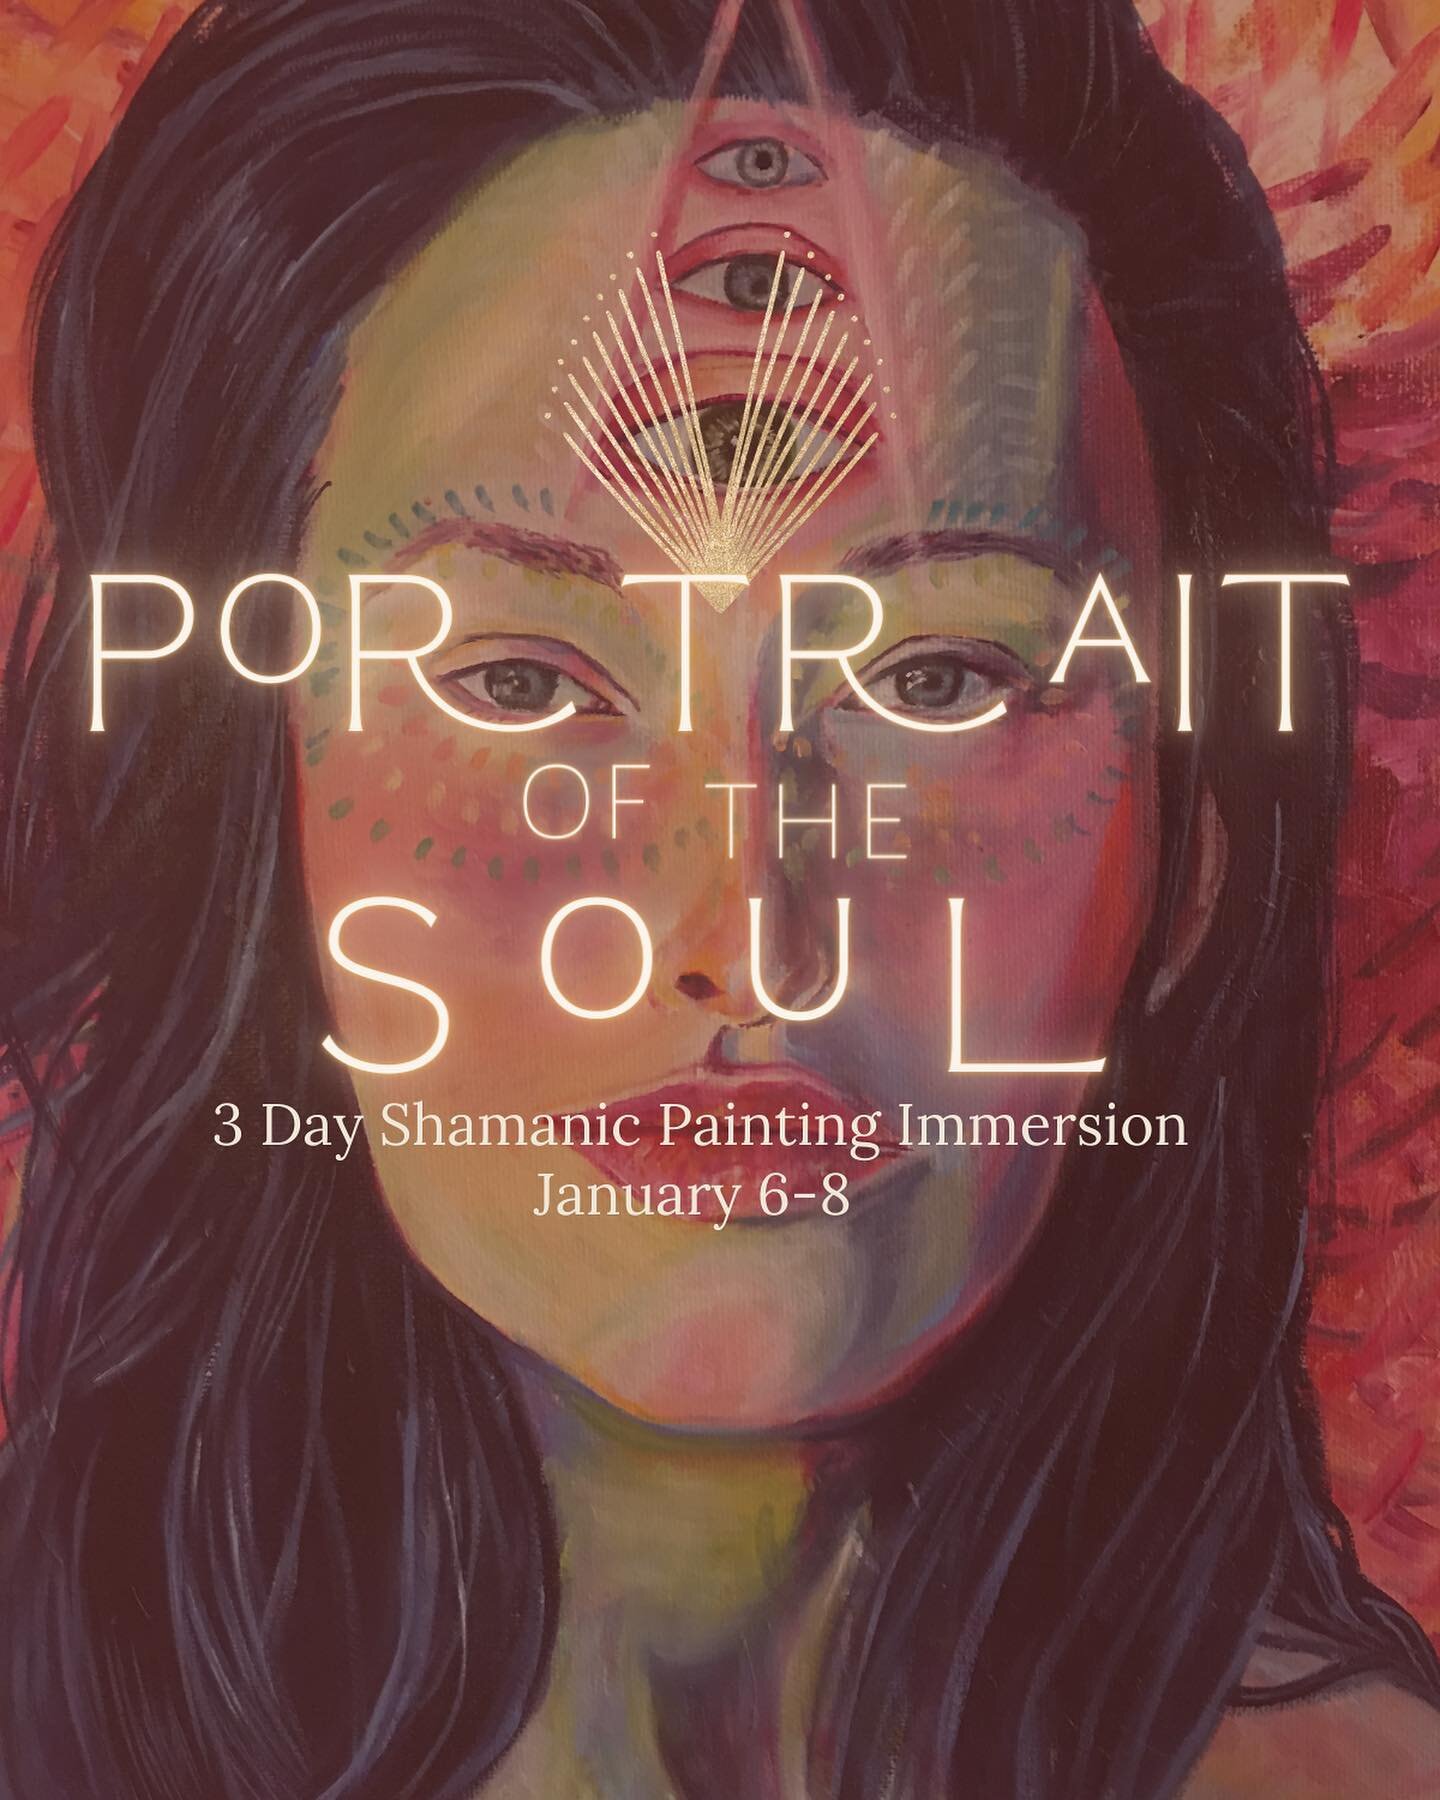 I don&rsquo;t know about you, but I feel like I want more IN PERSON experiences. So I am bringing my deepest soul offering to the heart of my community&lt;3

PORTAIT OF THE SOUL is a 3 day painting immersion designed to take you into the depths of yo